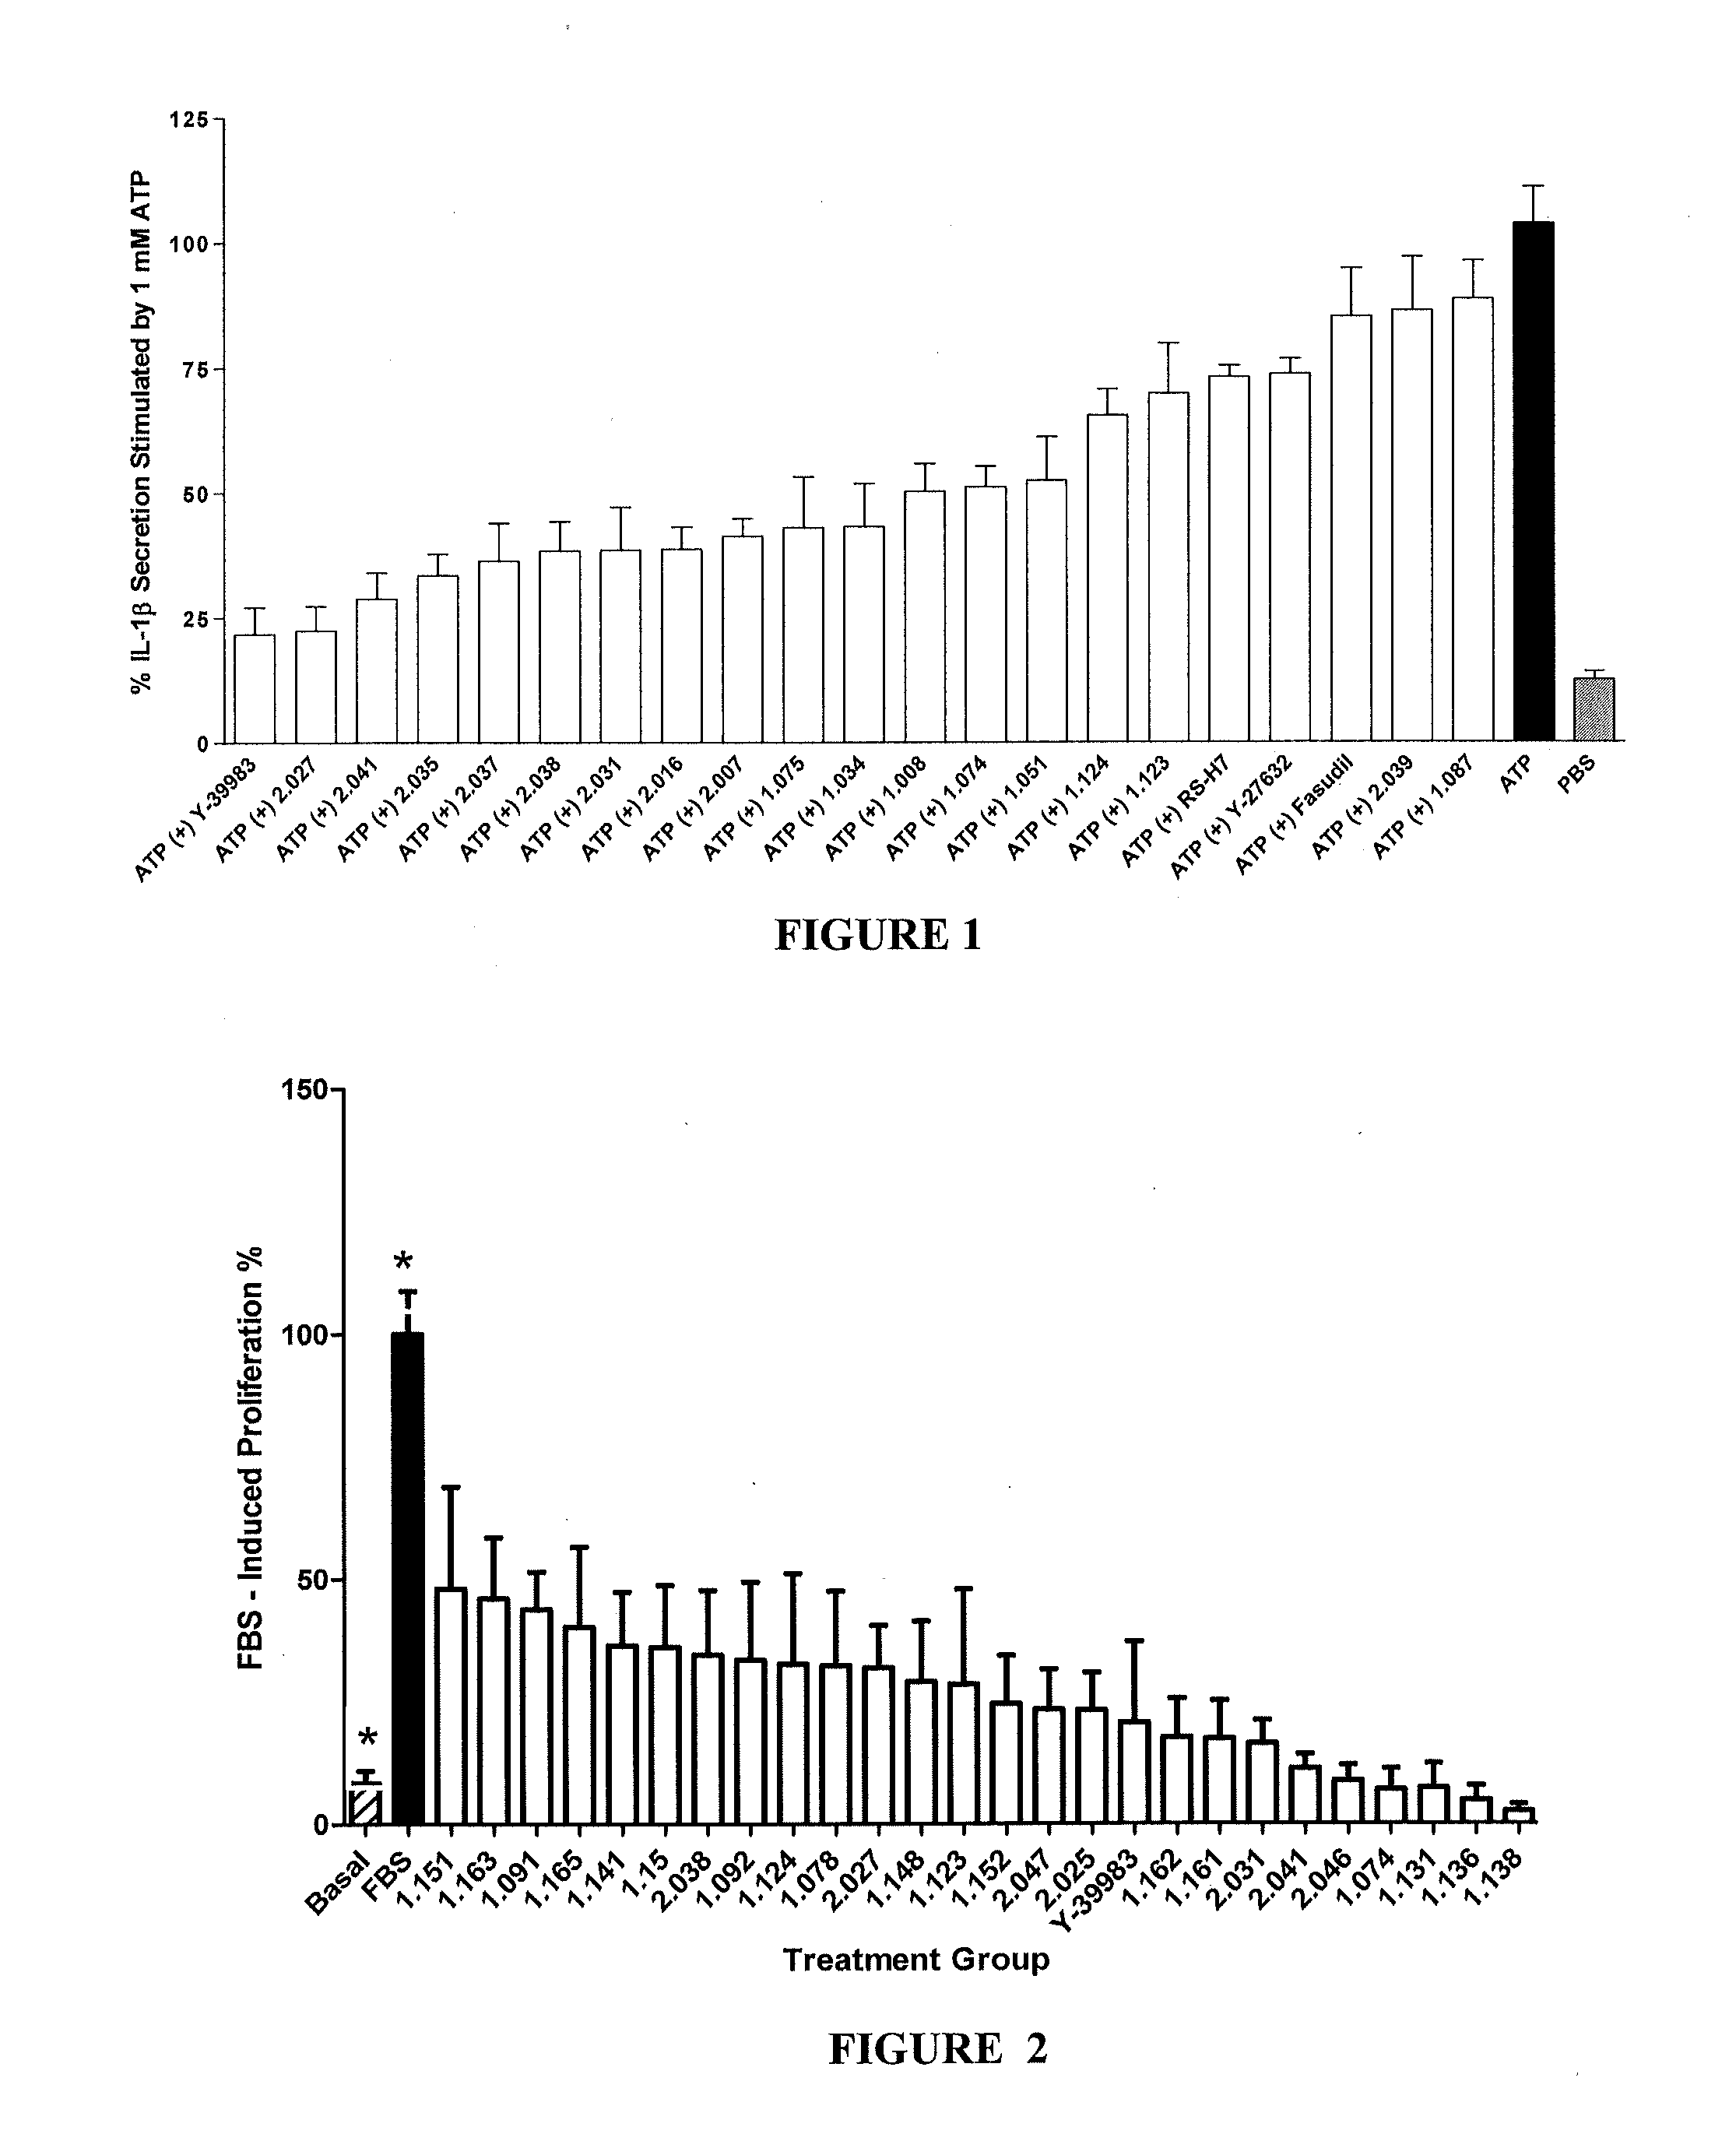 Method for treating diseases associated with alterations in cellular integrity using Rho kinase inhibitor compounds